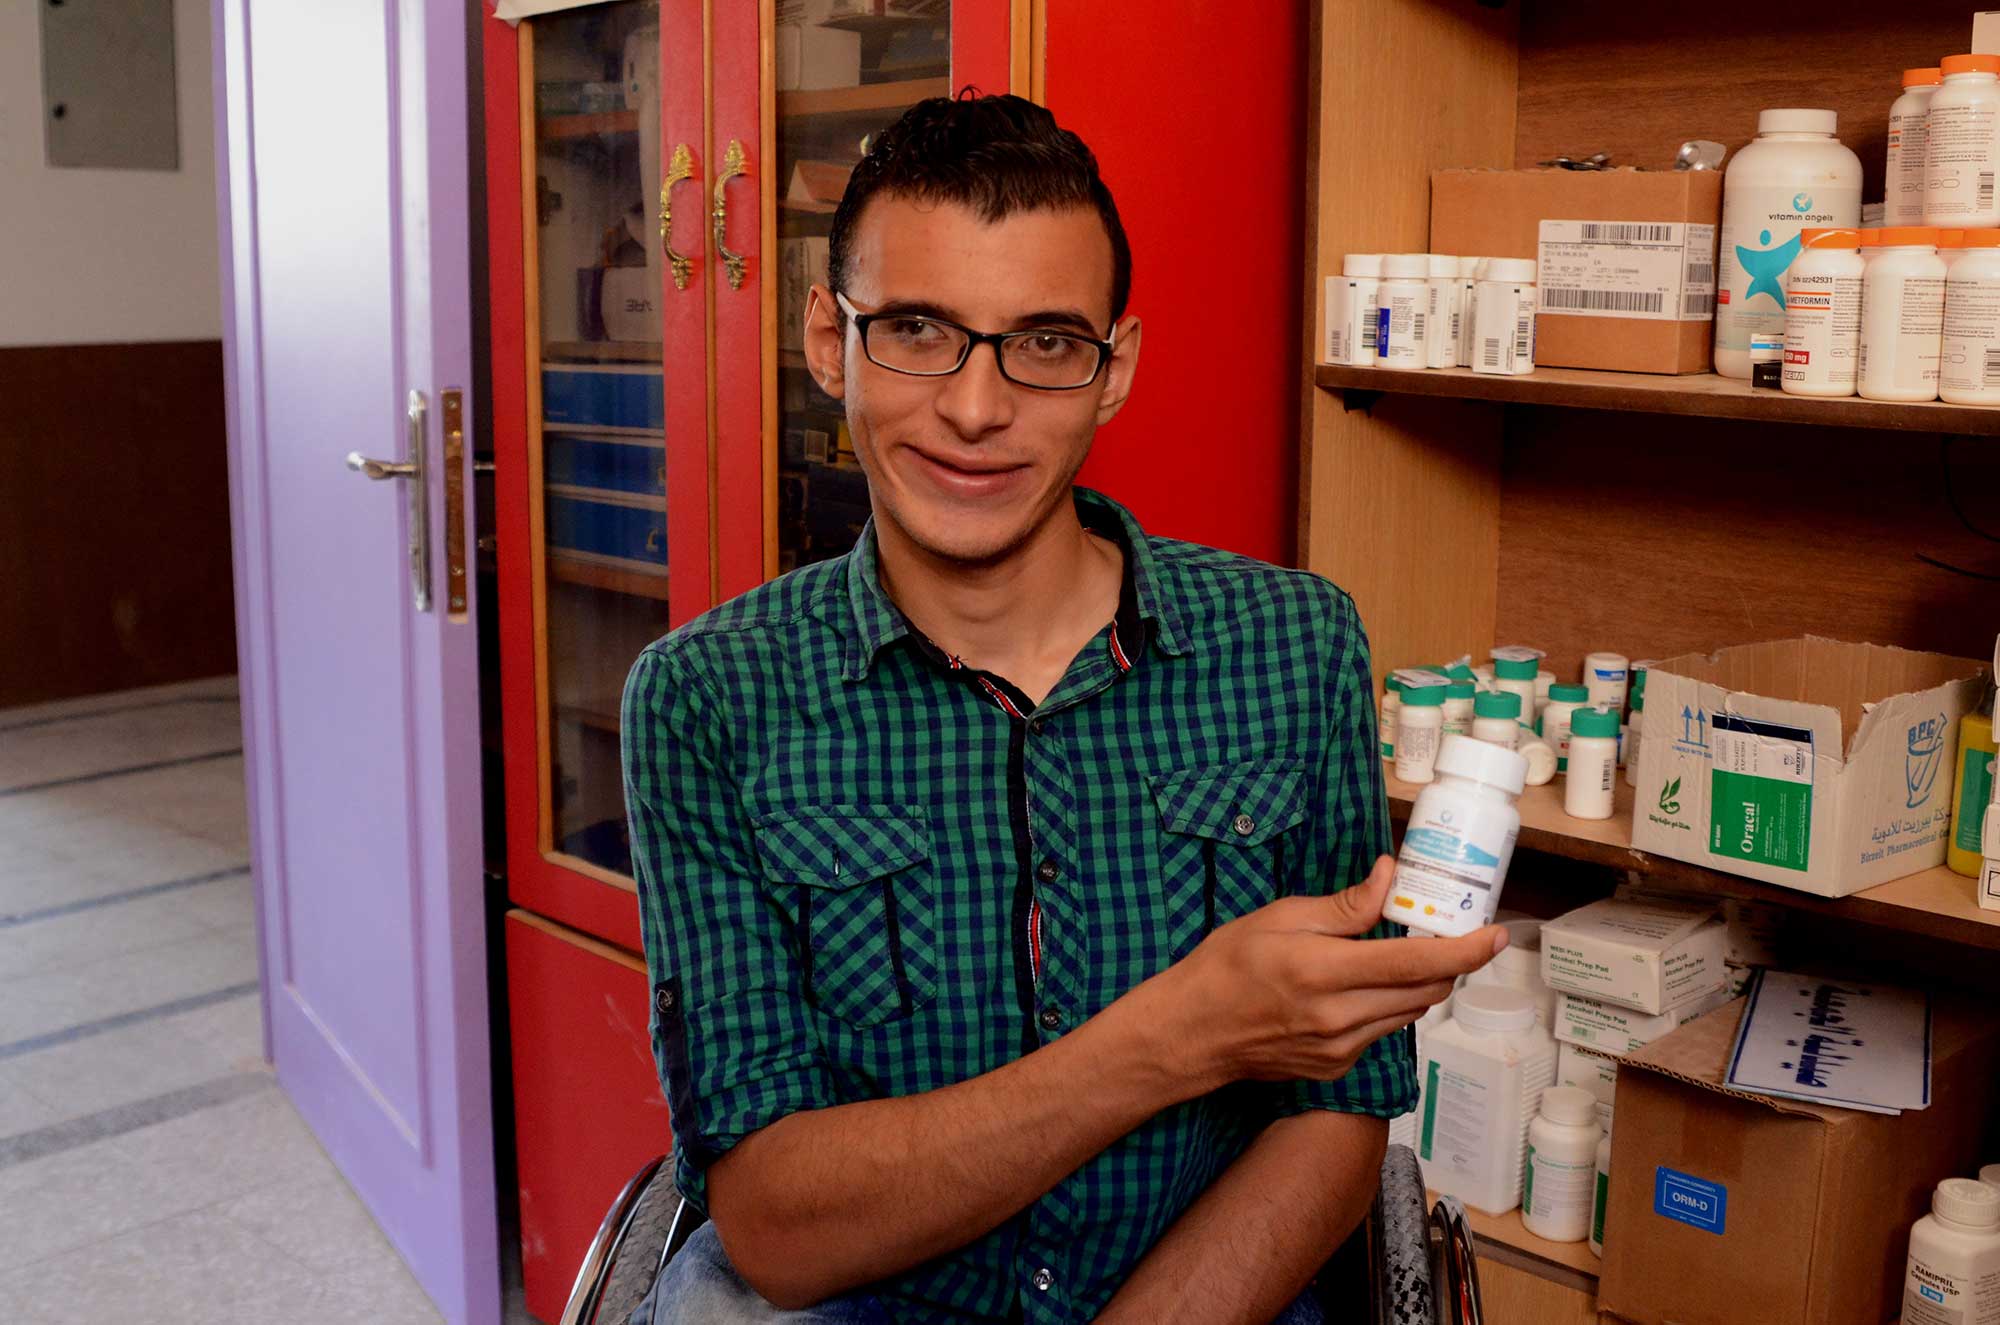 Ali, 19, was left disabled by a car accident. He's holding the medicine he needs to stay healthy, delivered by Anera.